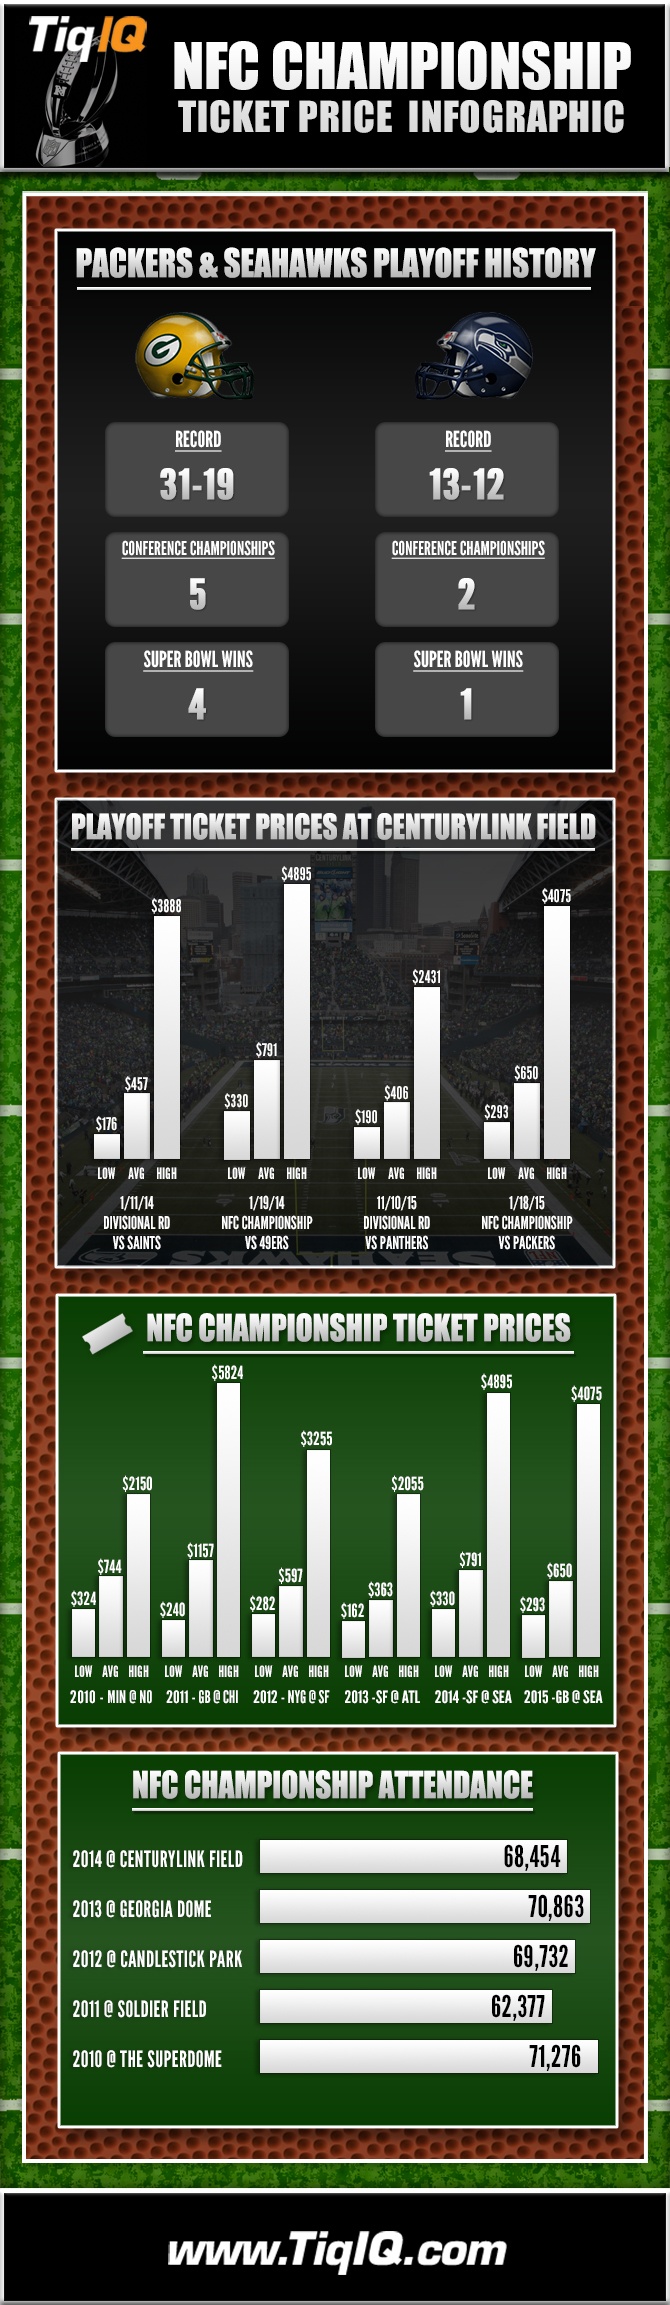 NFC Championship Tickets 18 Less Expensive Than Last Year